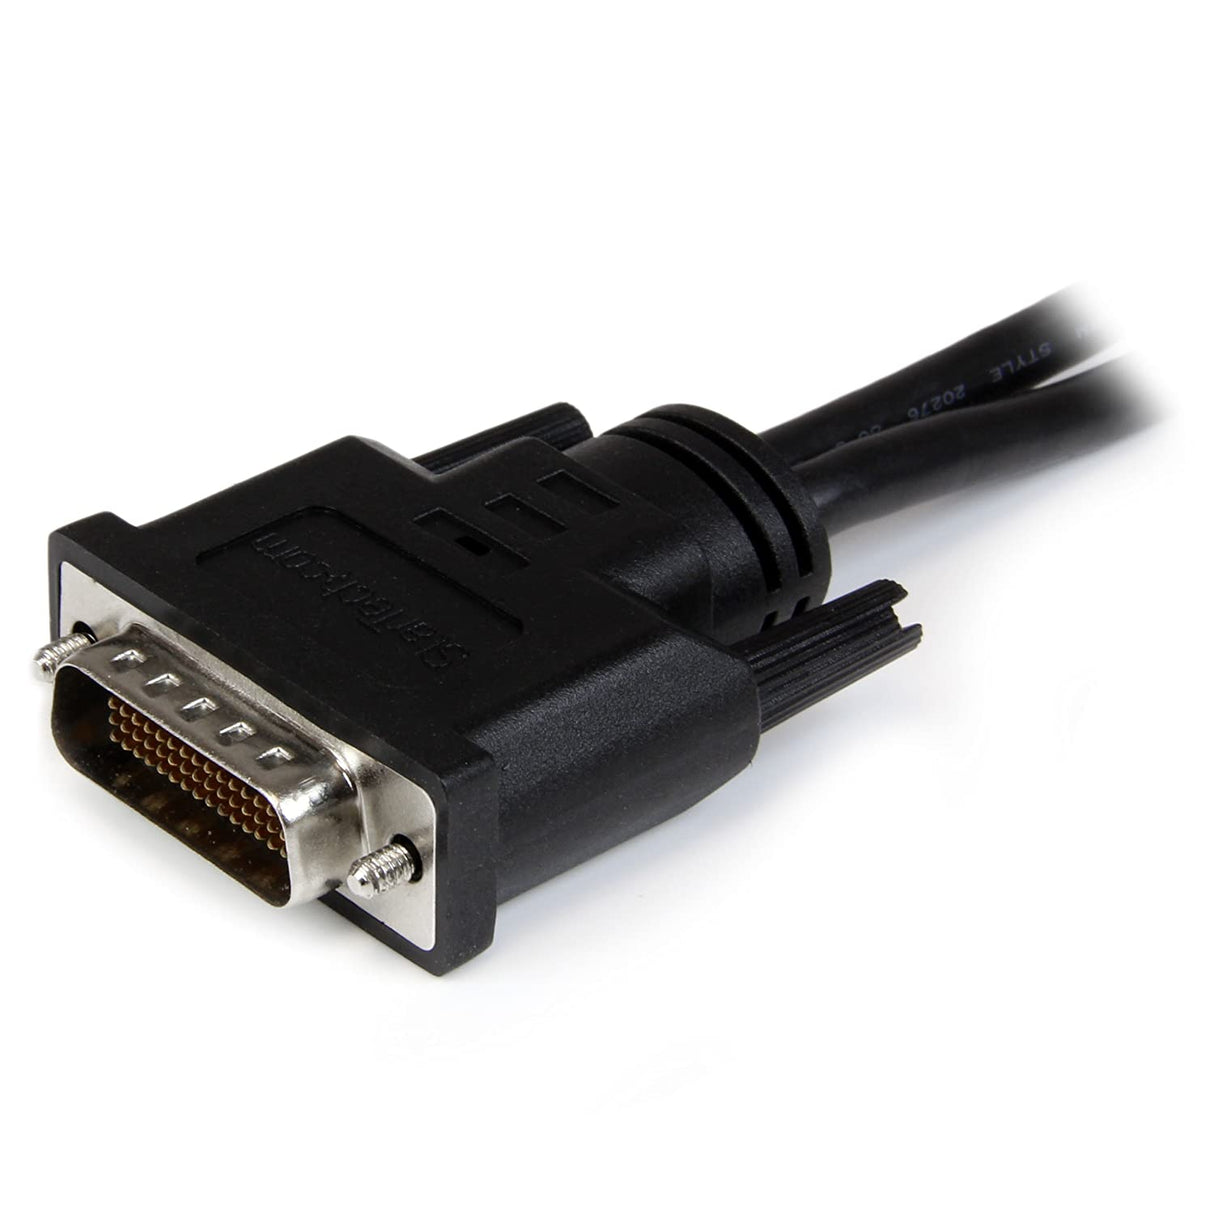 StarTech.com DMS-59 to DisplayPort - 8in - DMS 59 to 2x DP - Y Cable - DMS-59 Adapter - DisplayPort Splitter Cable - LFH Cable (DMSDPDP1),Black Dual DisplayPort